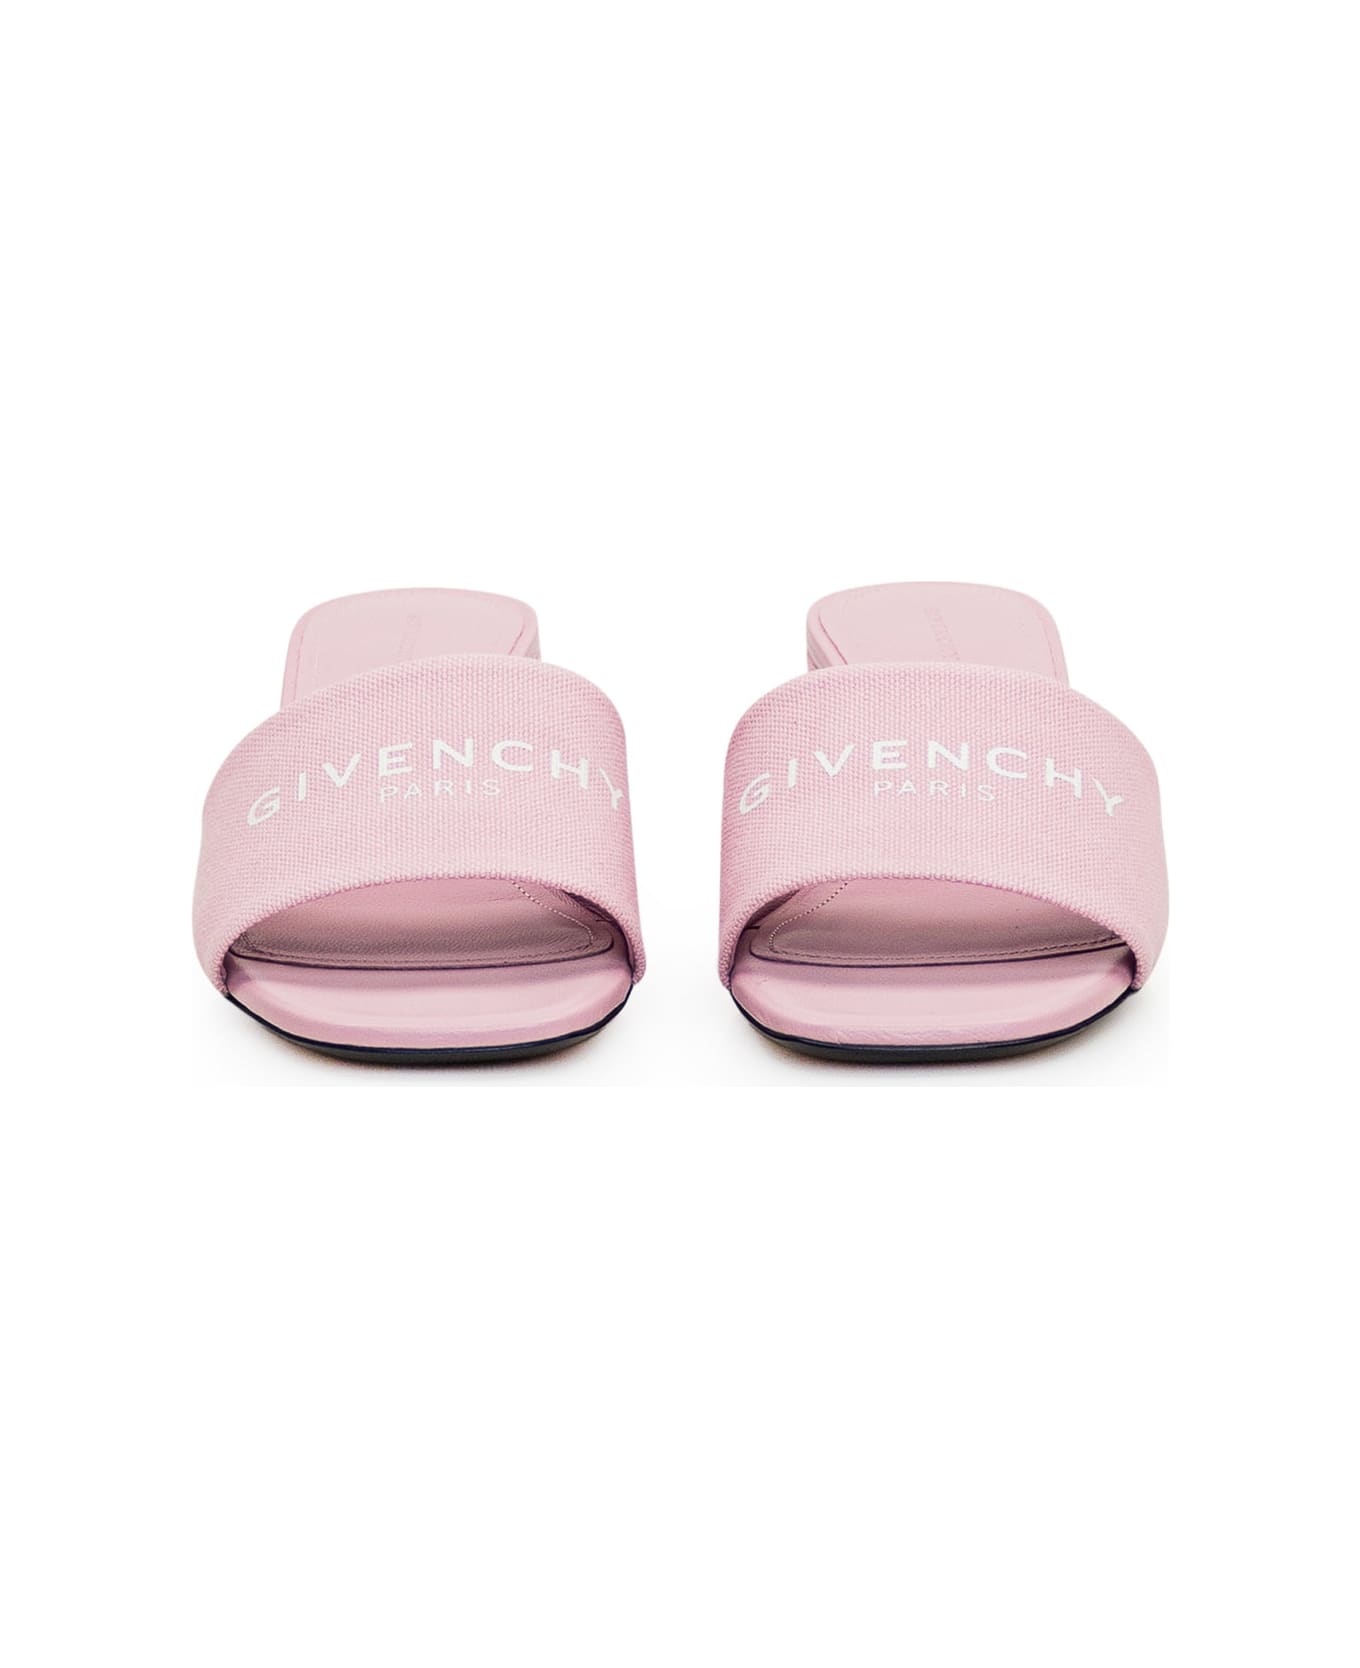 Givenchy 4g Sandals - OLD PINK